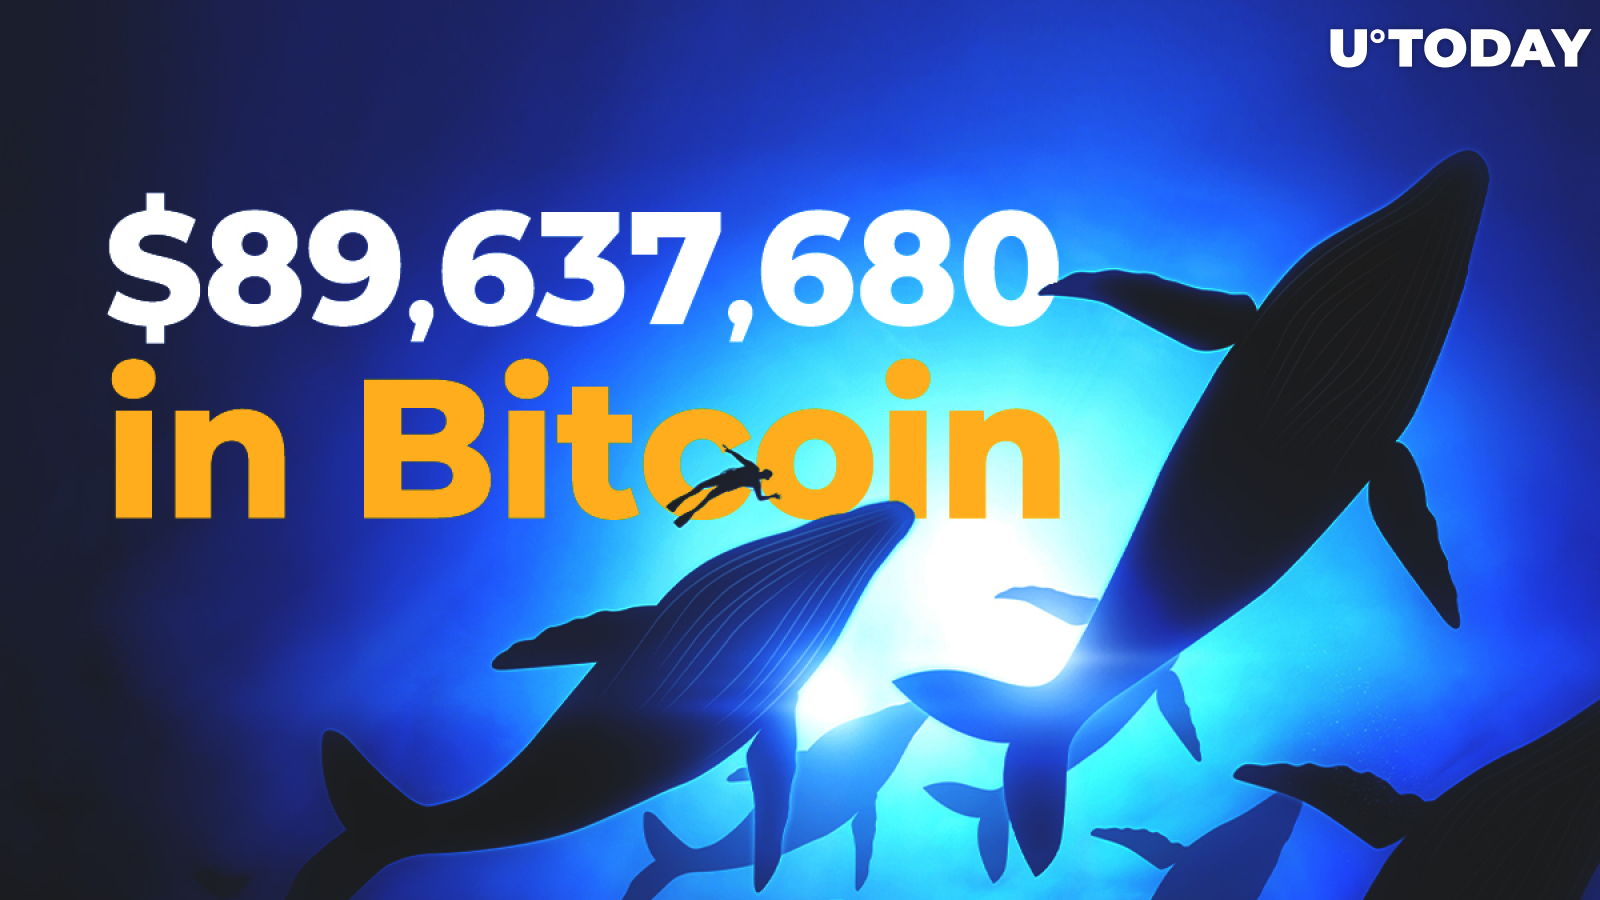 Whales Transfer $89,637,680 in Bitcoin As BTC Strives to Remain Above $10,000